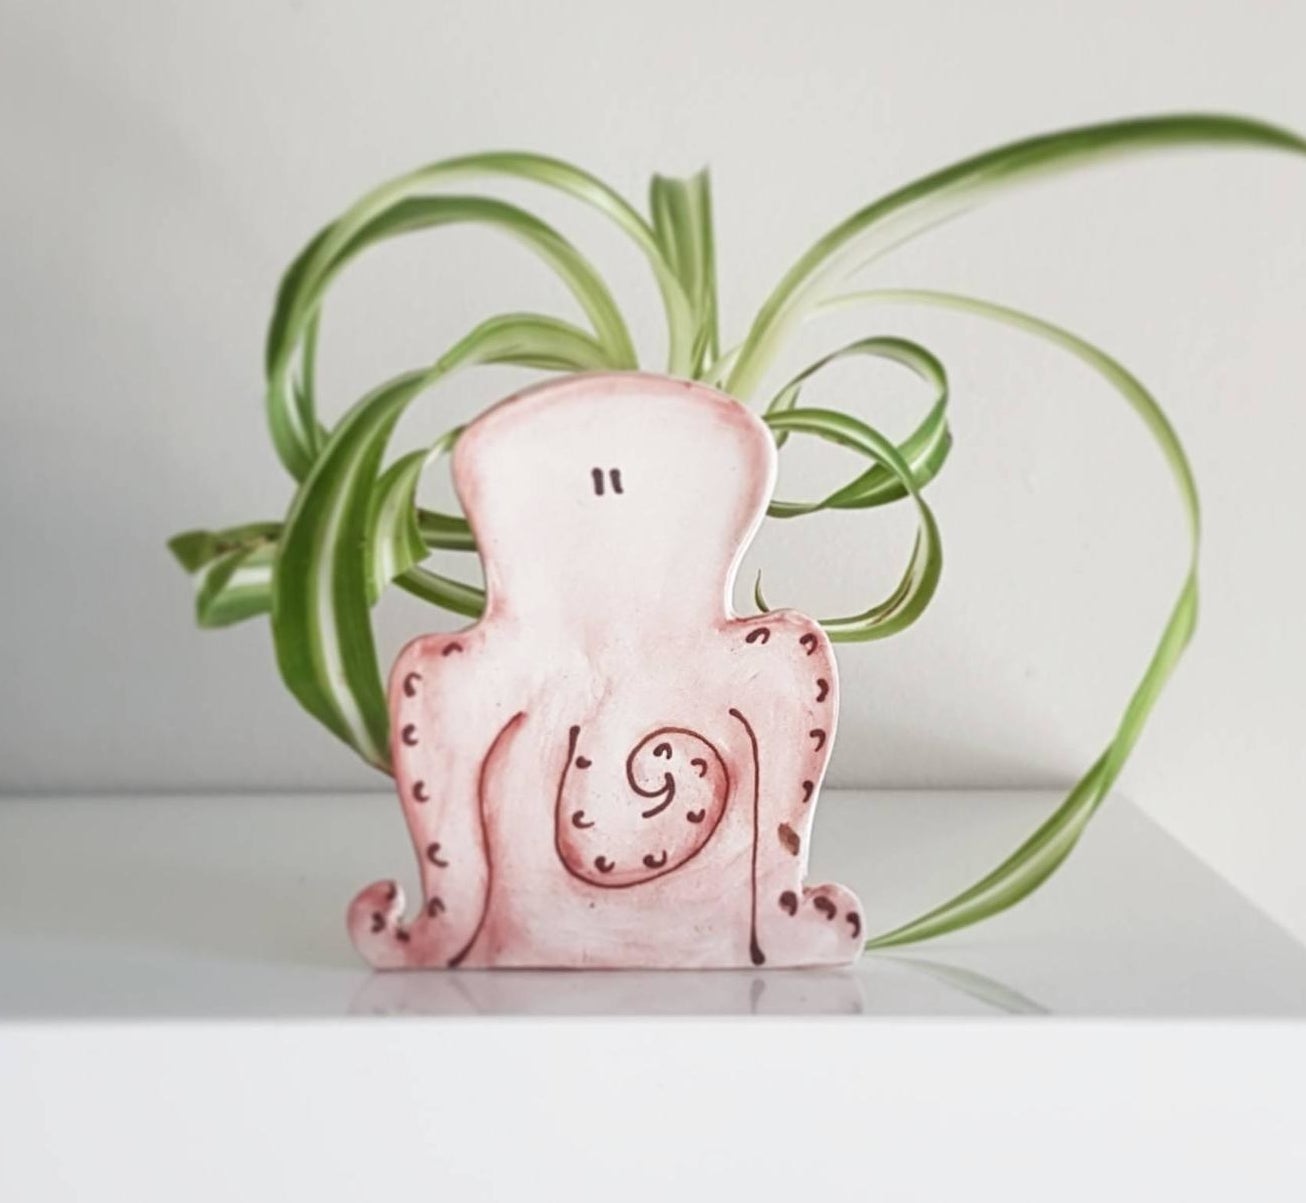 The small planter in red that looks like an octopus and has a green air plant in it